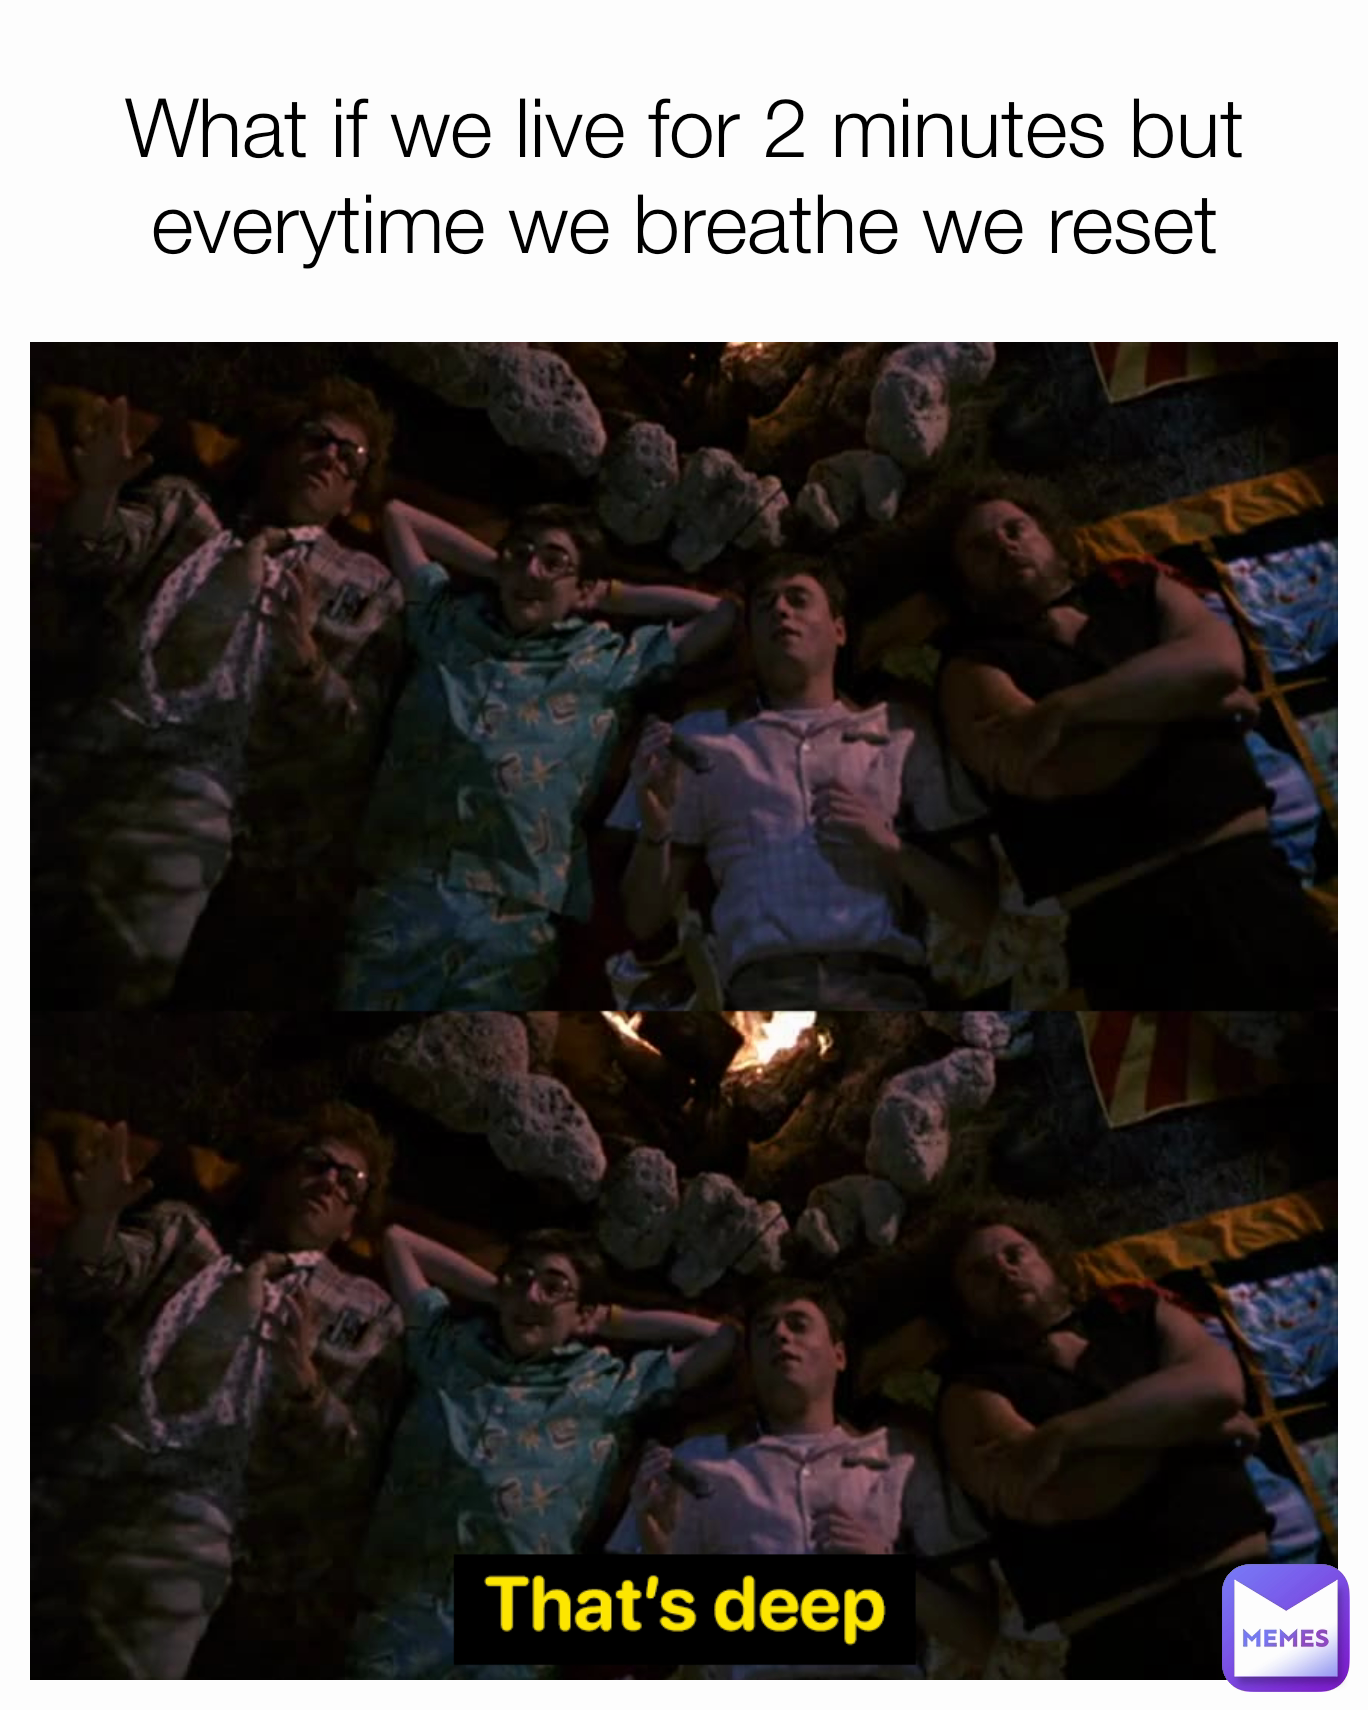 What if we live for 2 minutes but everytime we breathe we reset